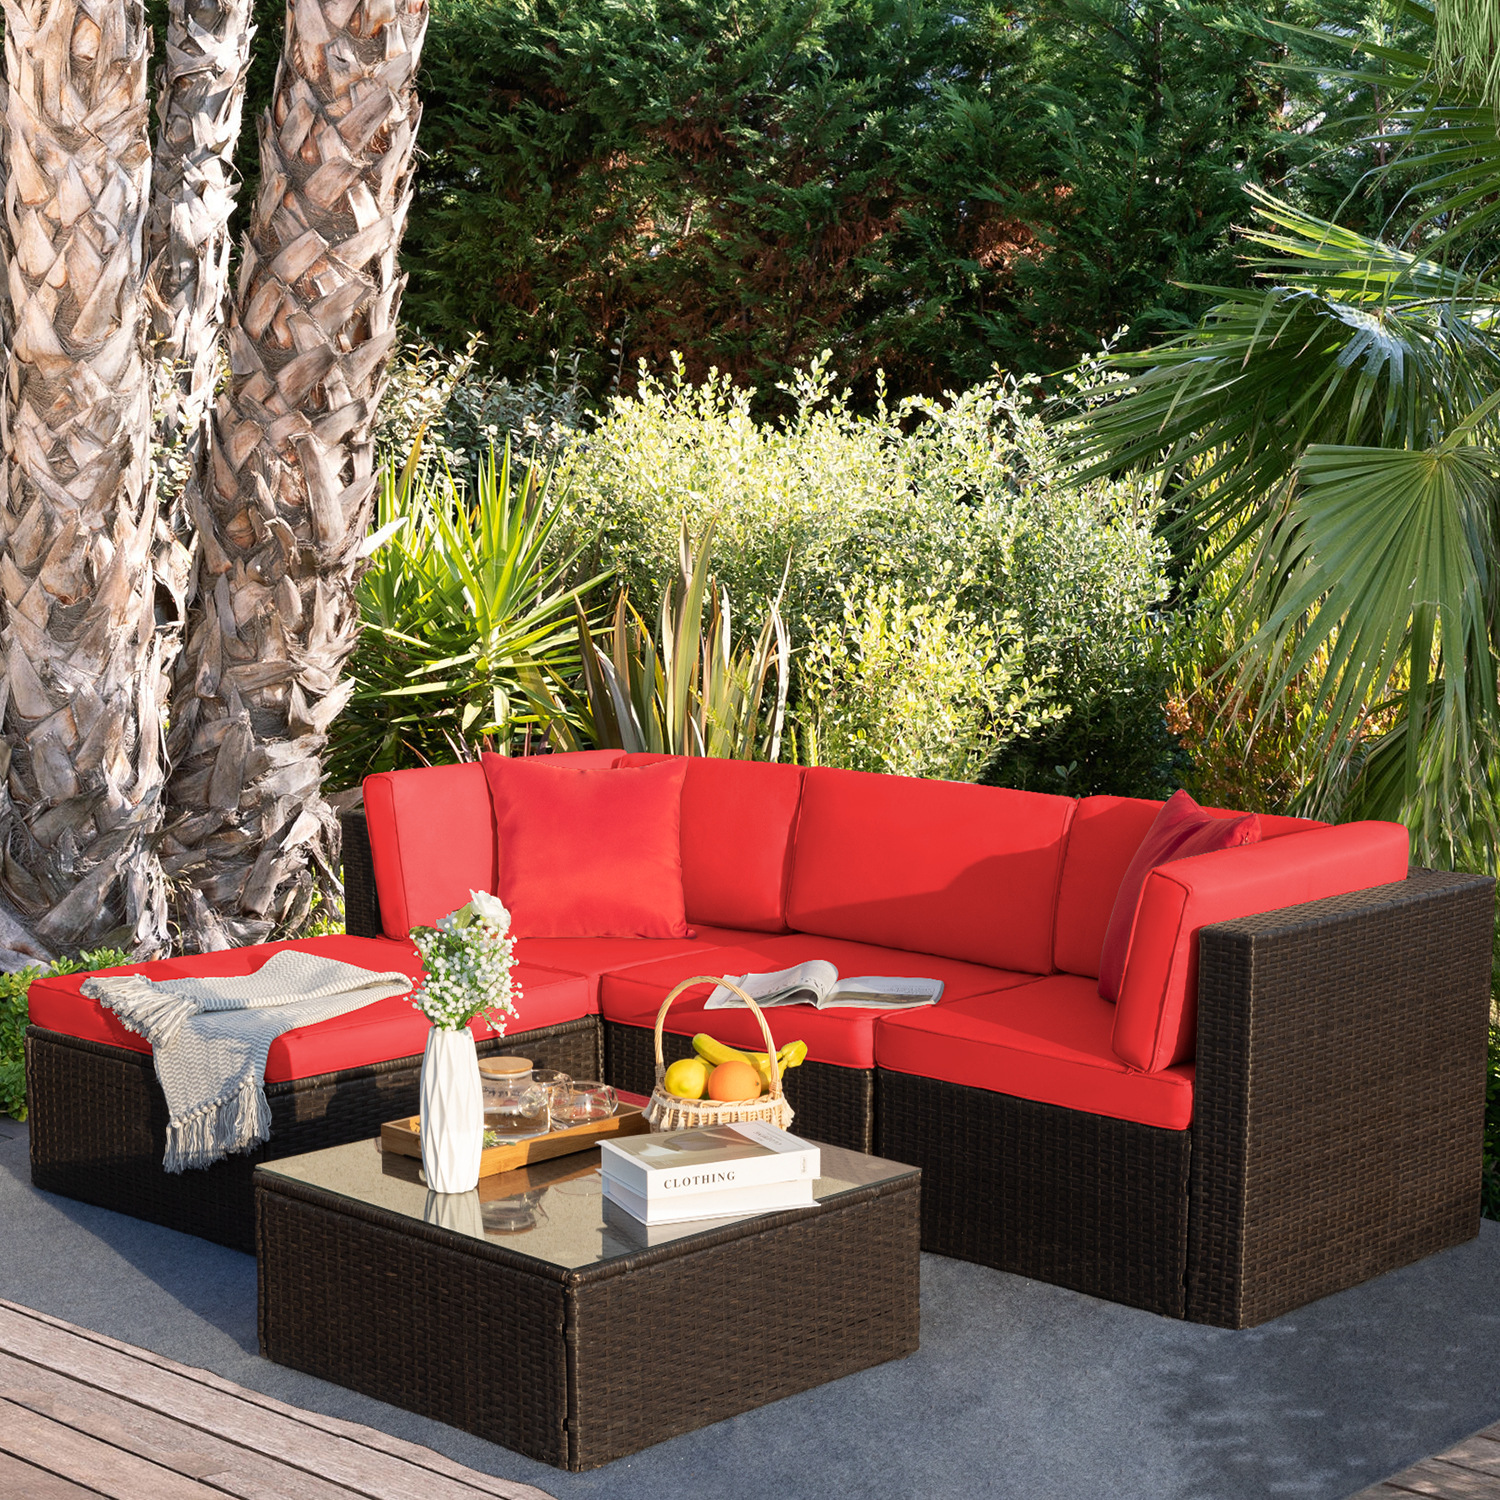 LACOO 5 Pieces Patio Conversation Set Rattan Outdoor Sectional Set with Chushions and Table(Red) - image 1 of 7